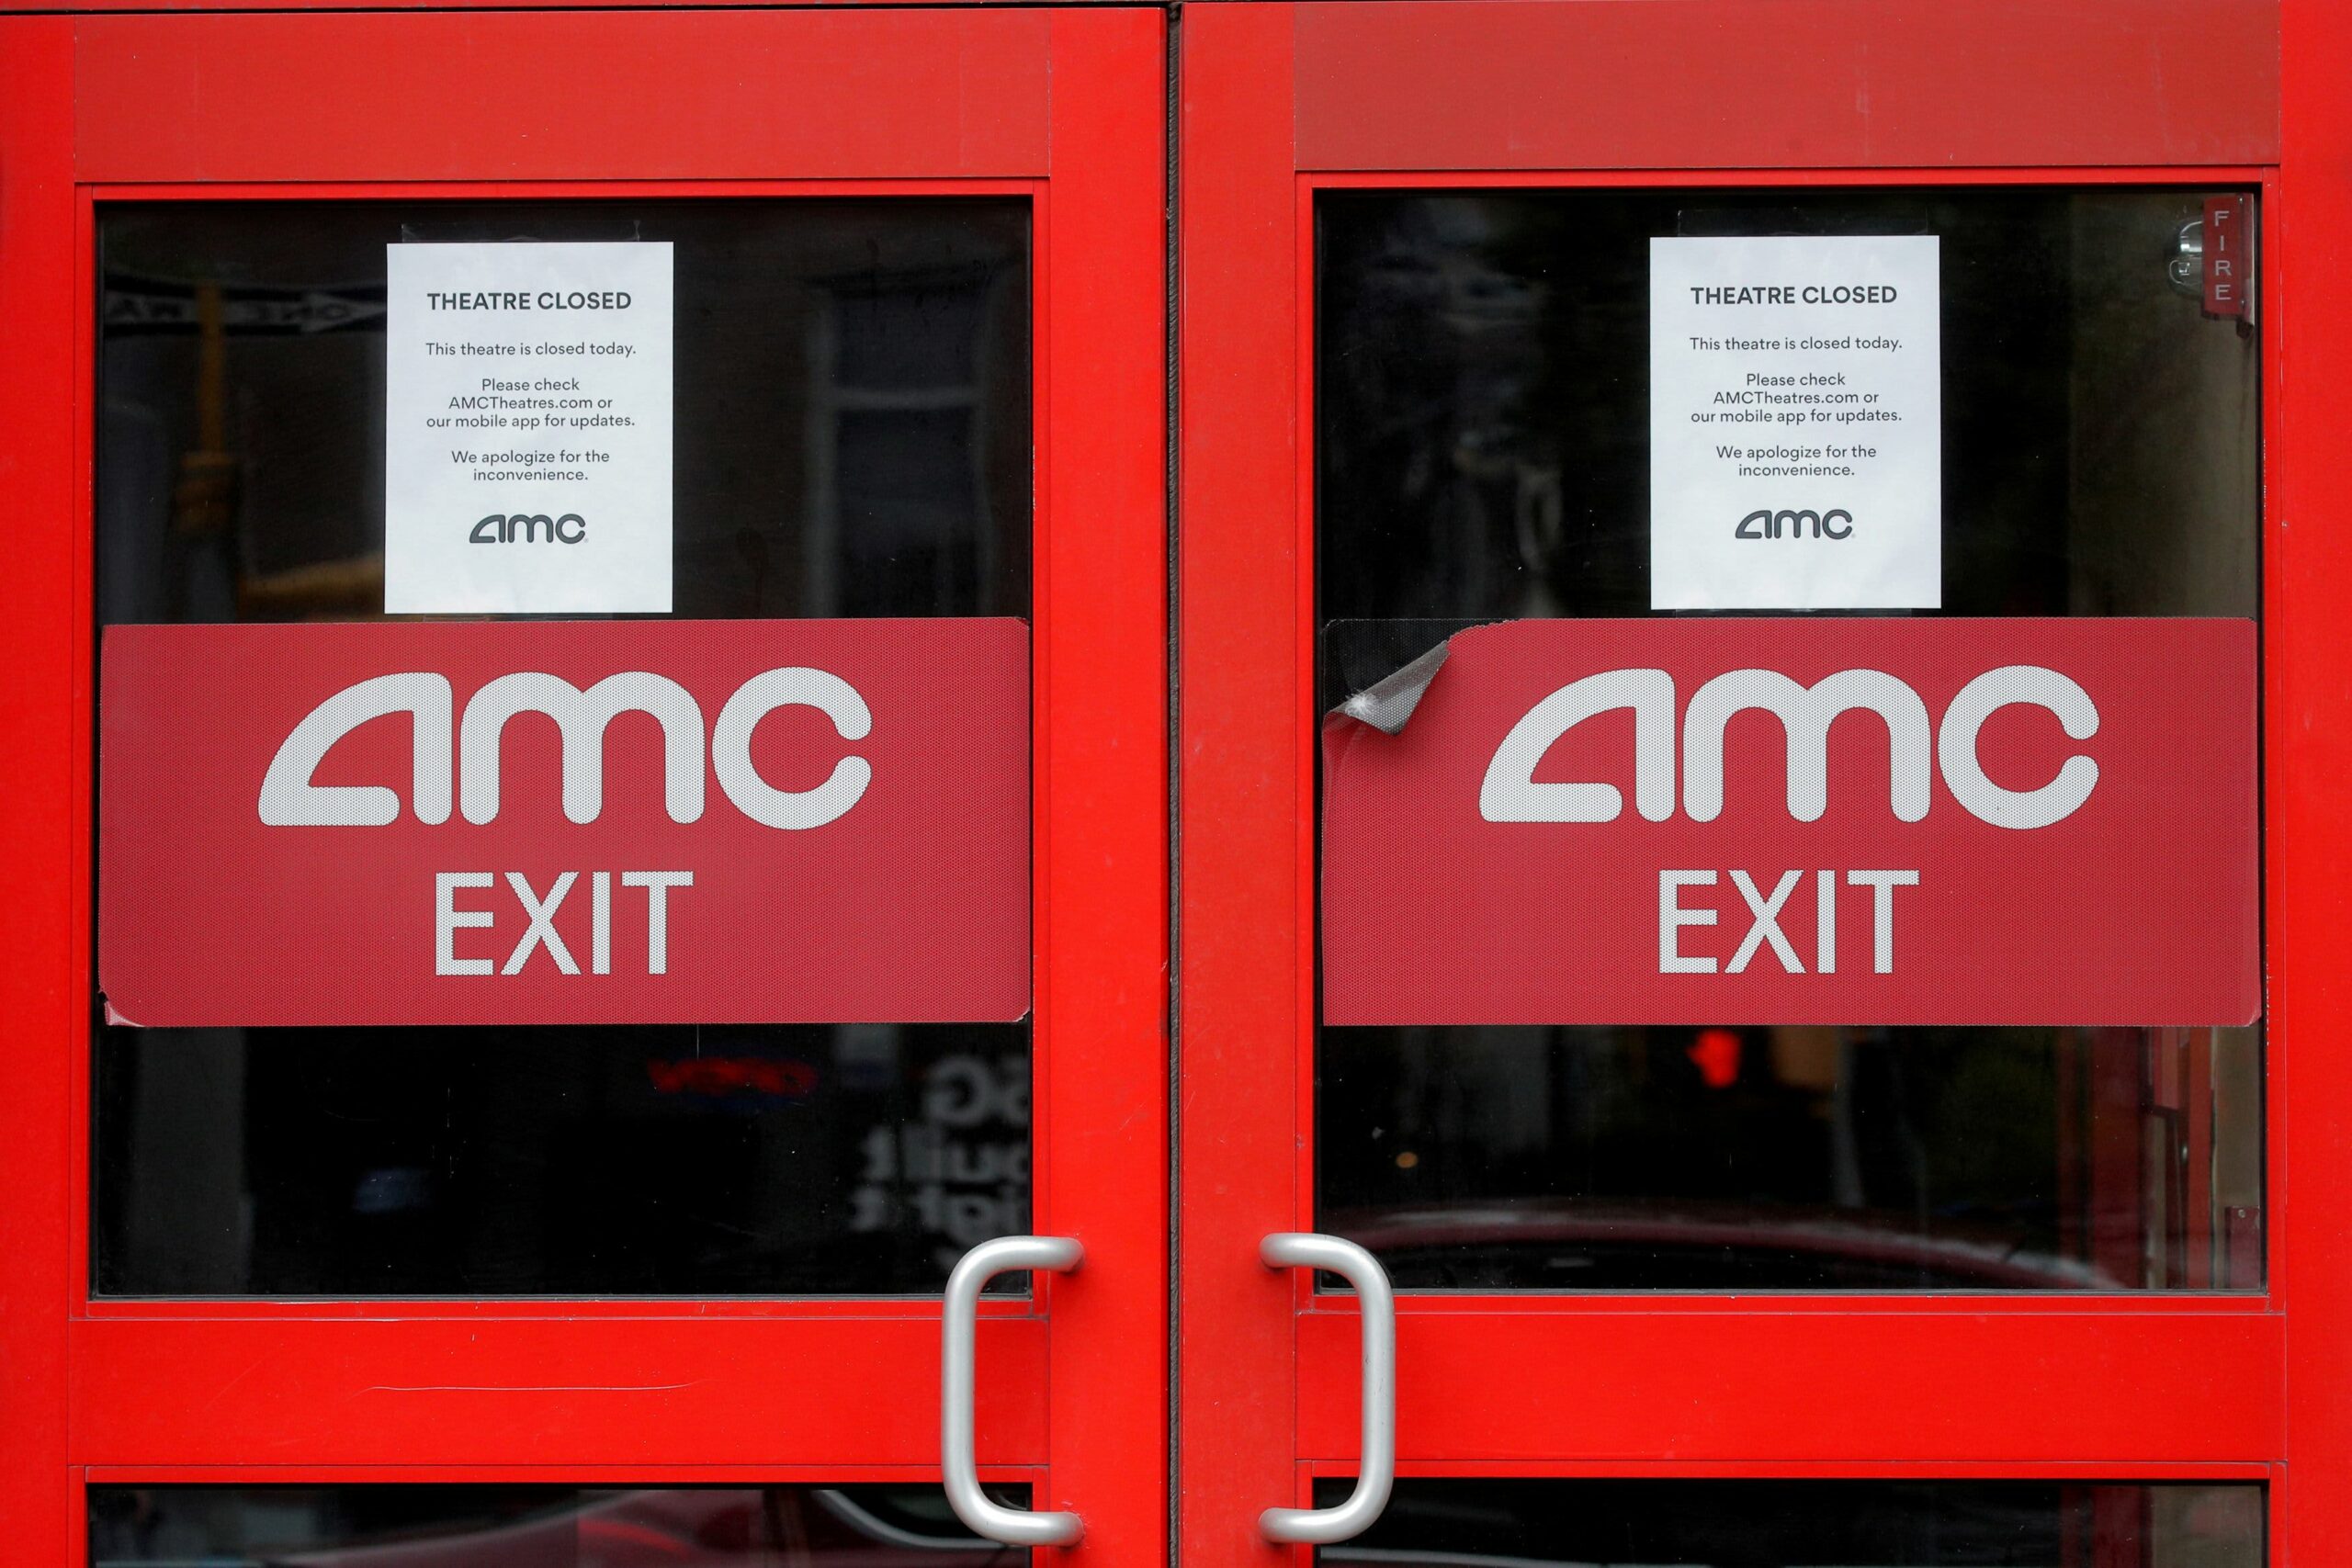 Mudrick Capital not owns debt or fairness in AMC, sources say